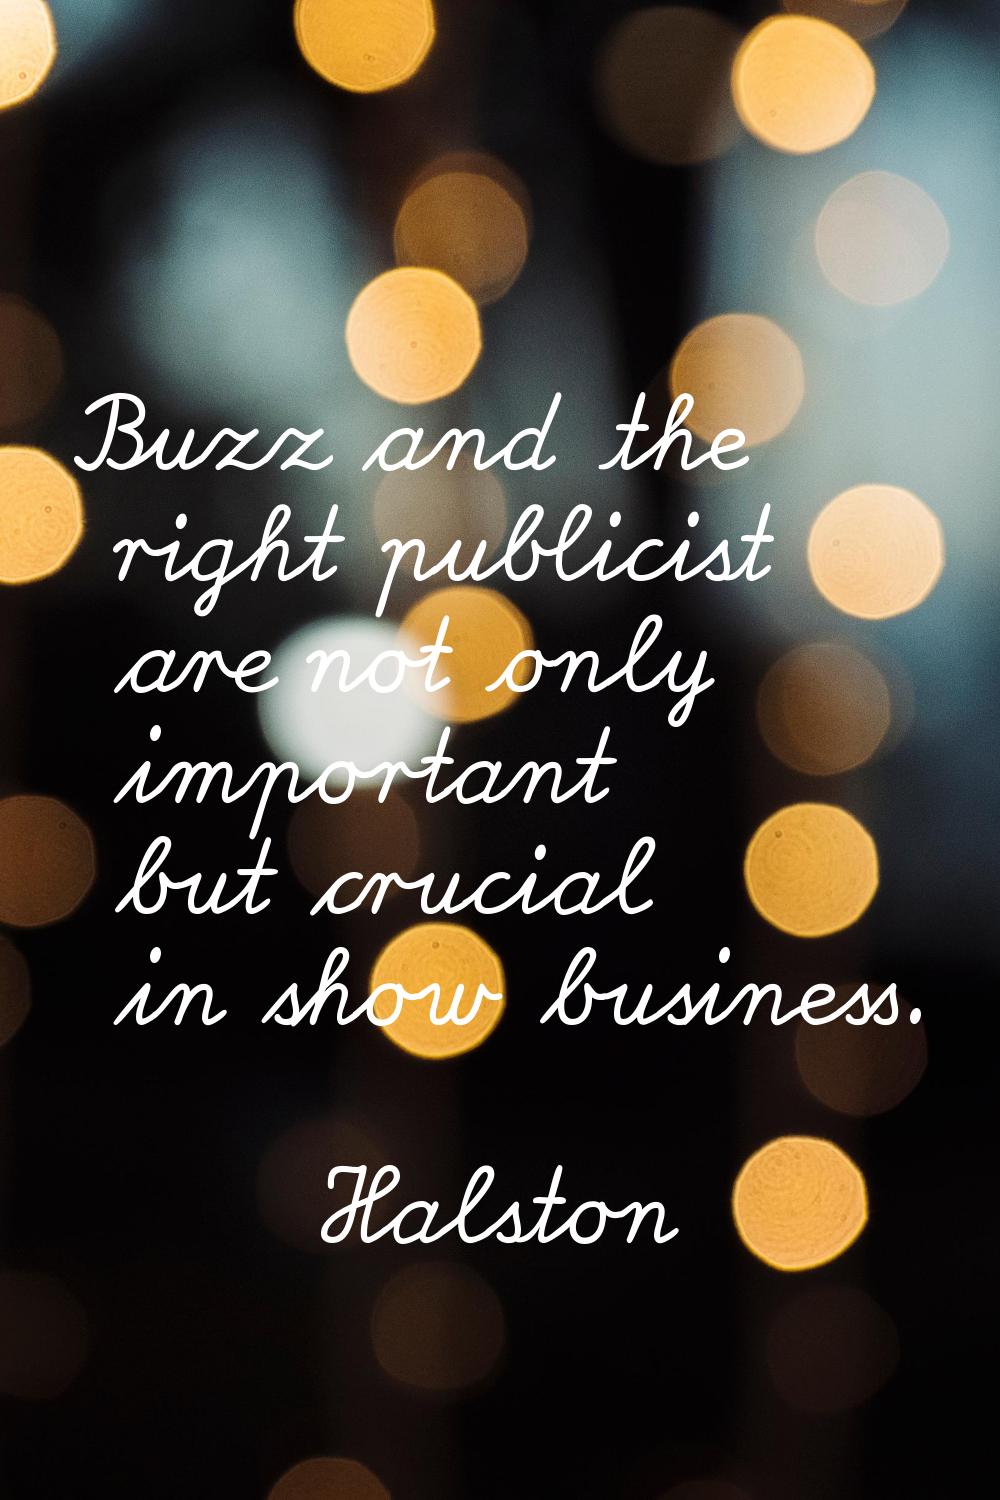 Buzz and the right publicist are not only important but crucial in show business.